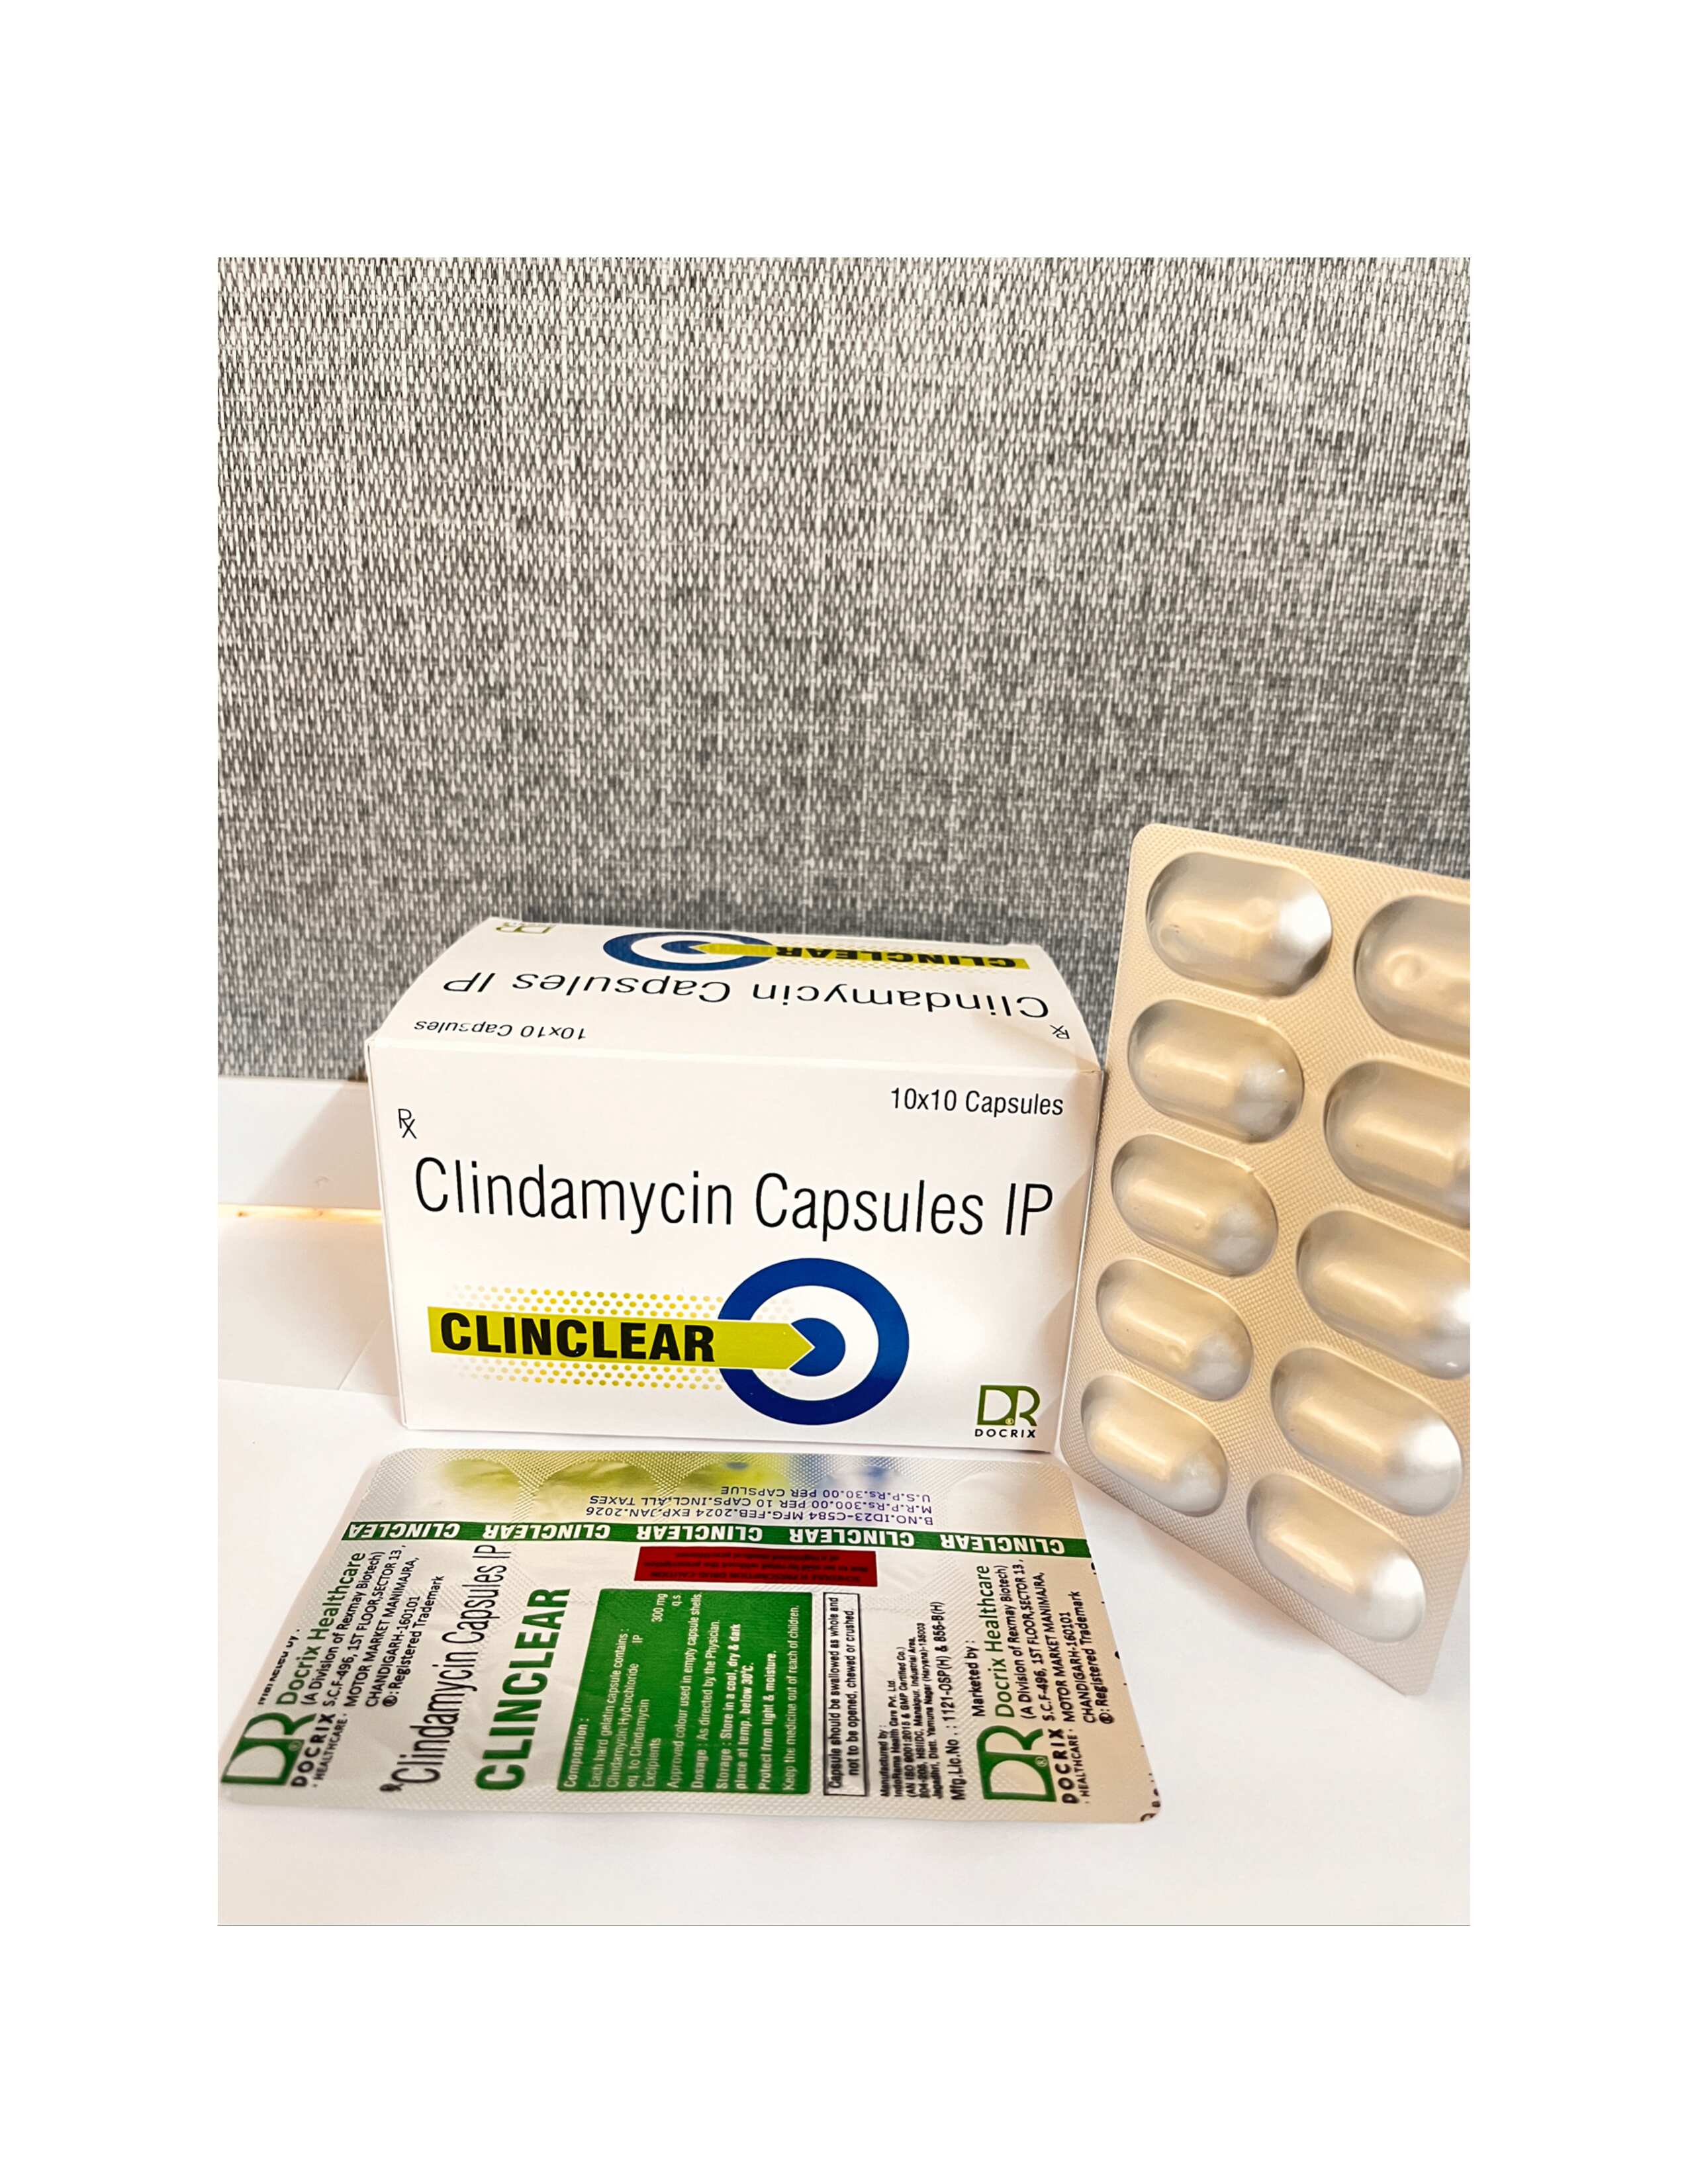 Product Name: Clinclear, Compositions of Clinclear are Clindamycin Capsule IP - Docrix Healthcare